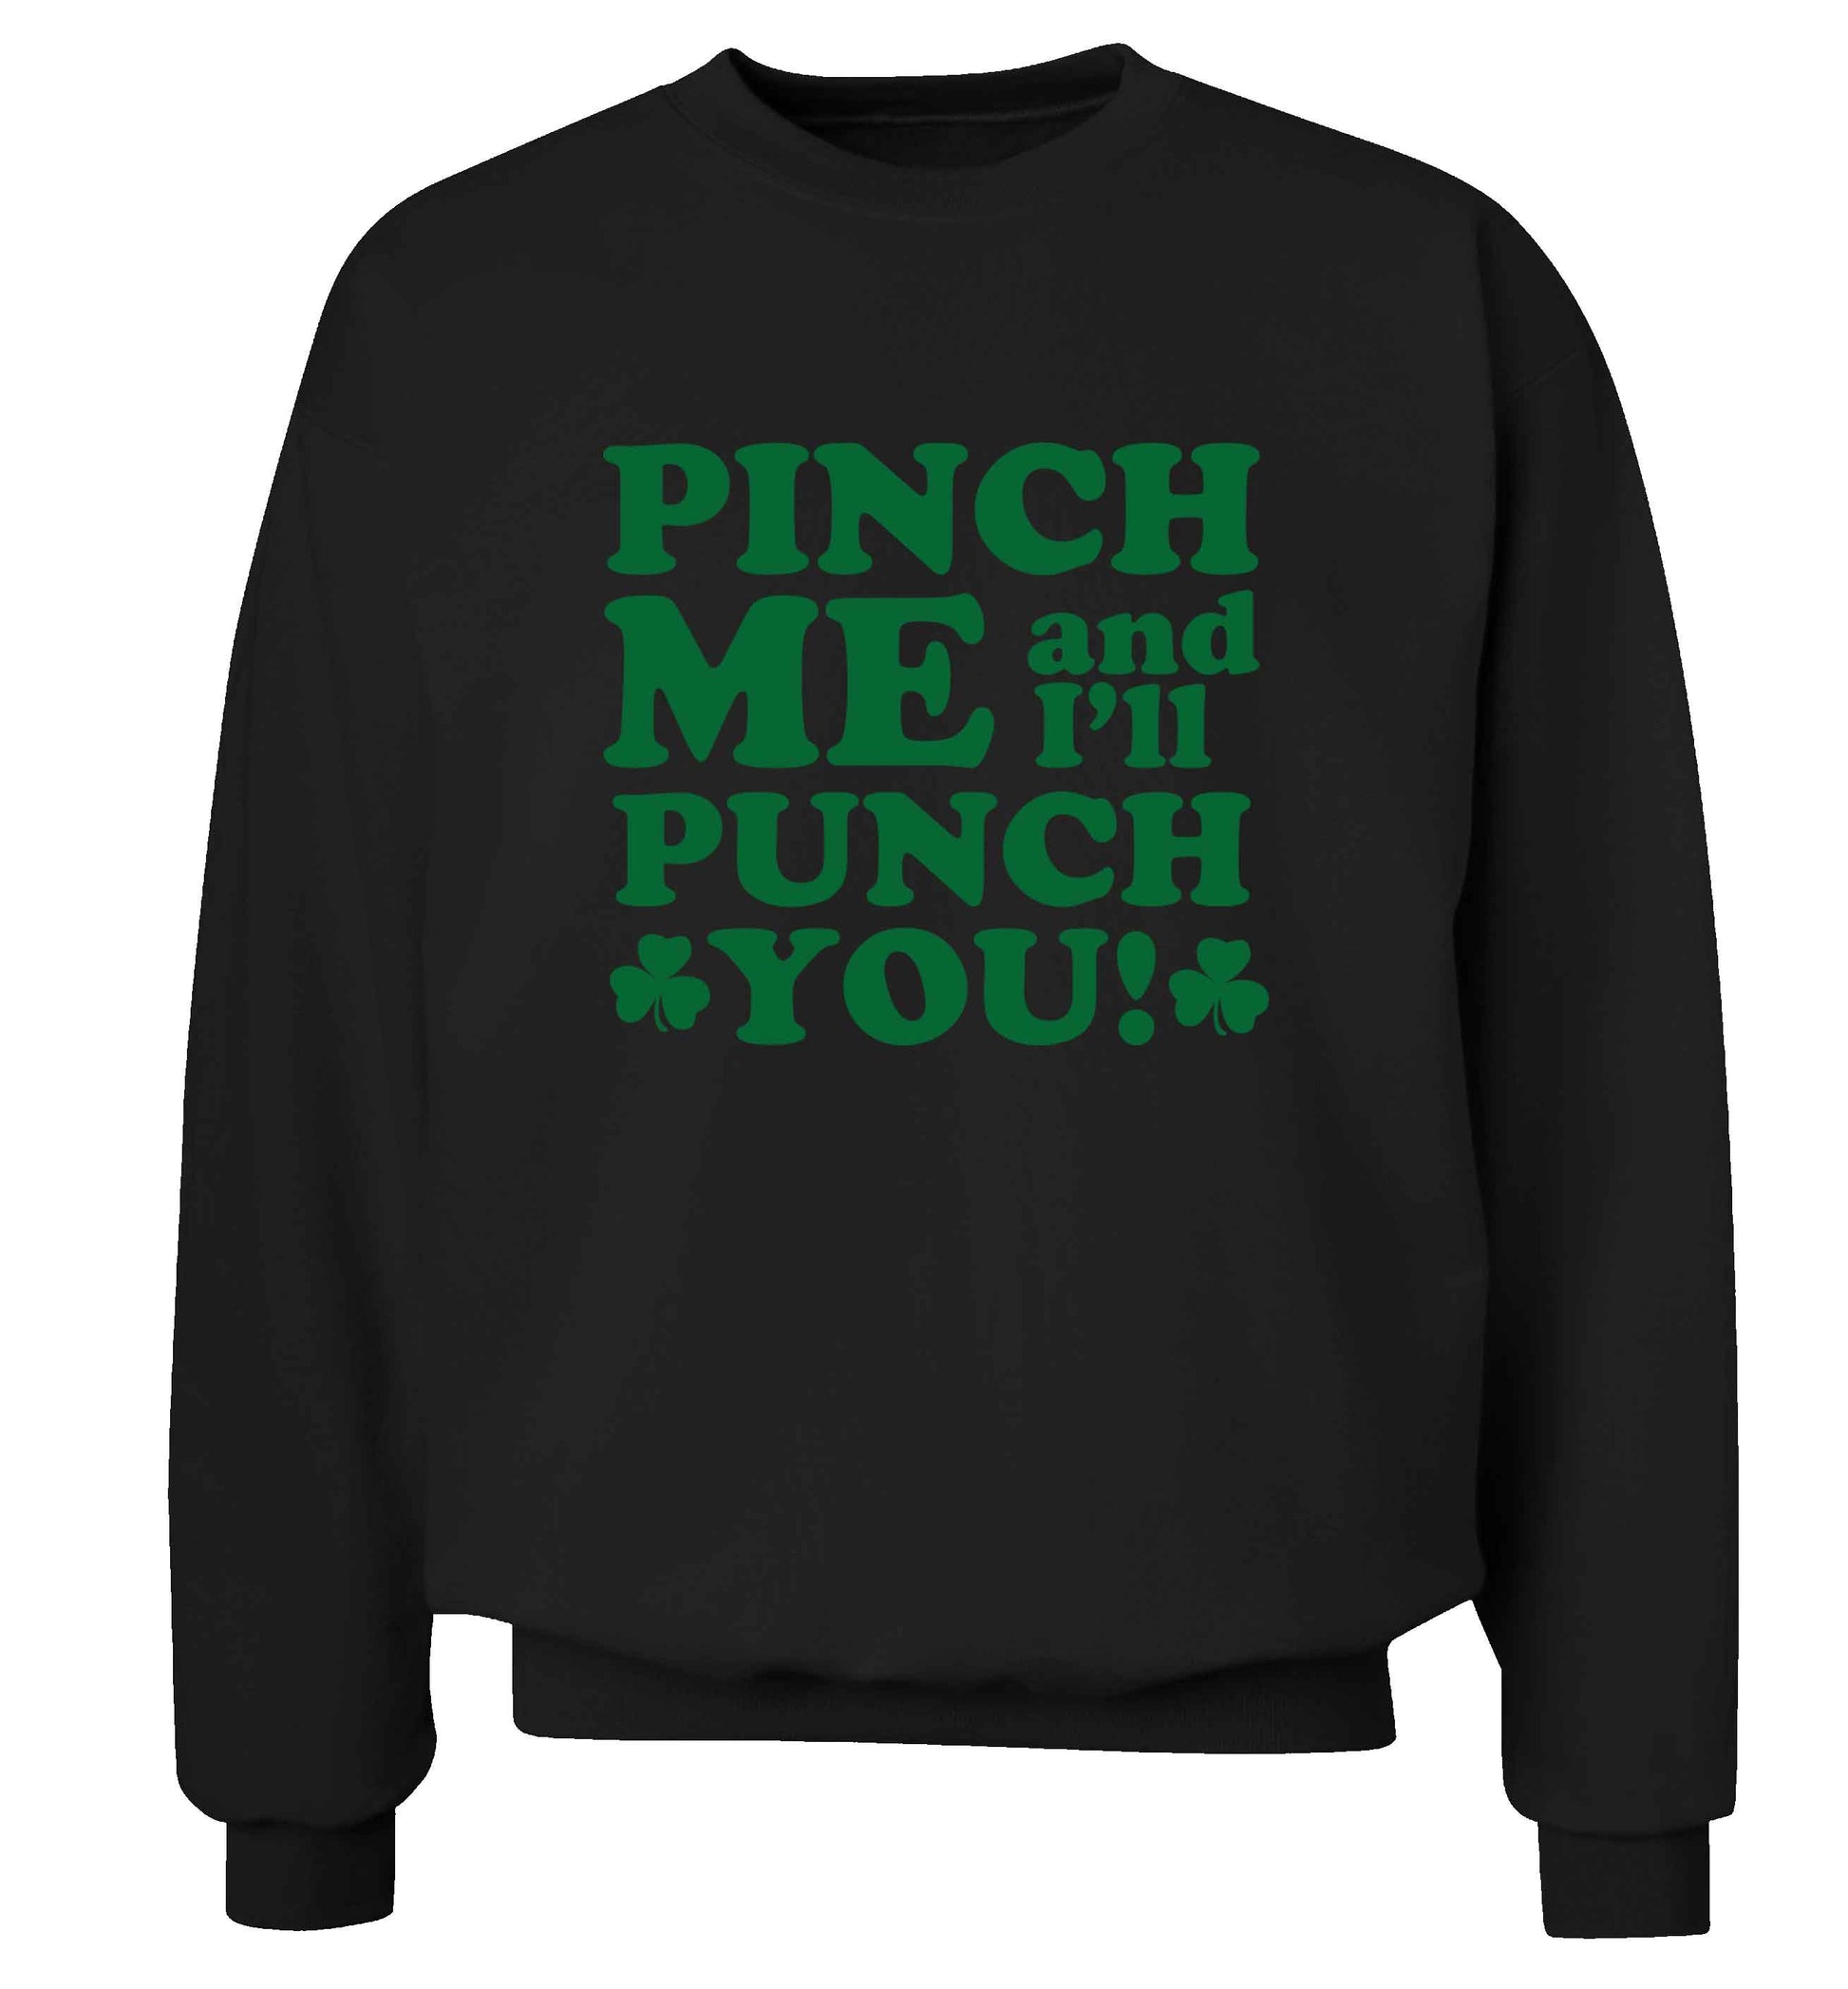 Pinch me and I'll punch you adult's unisex black sweater 2XL